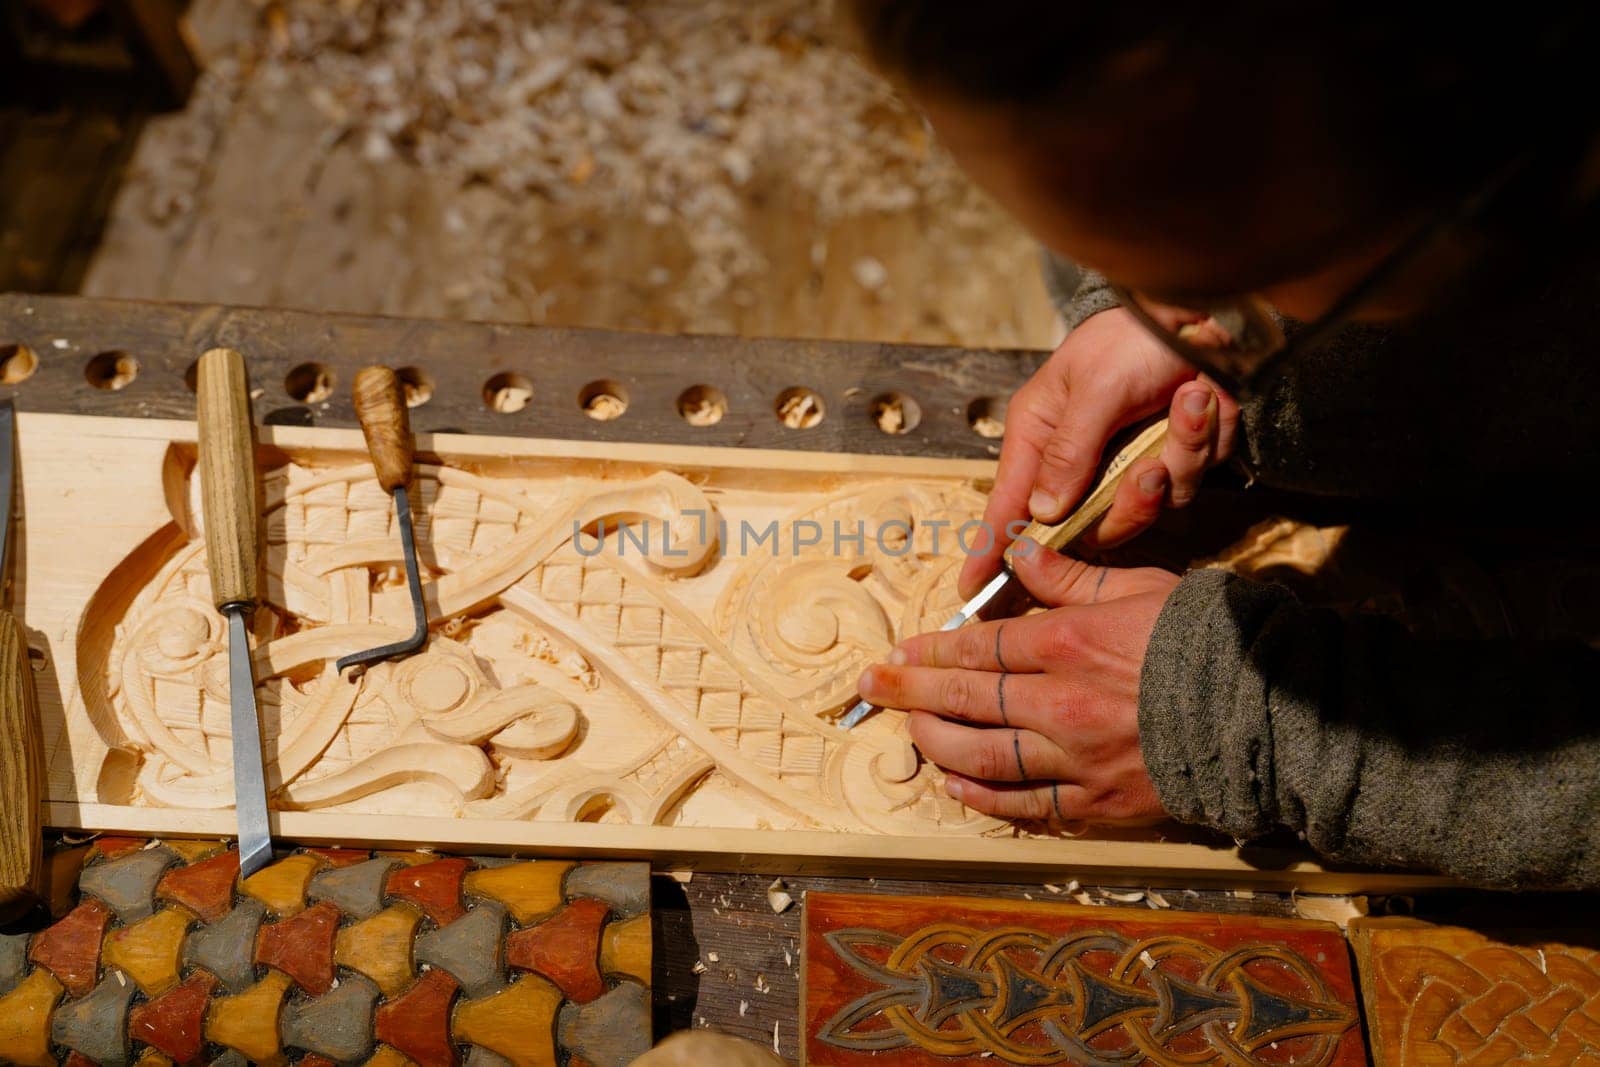 A talented carpenter meticulously carves detailed and elaborate designs on a piece of wood using traditional tools, showcasing craftsmanship and creativity in artisanal woodworking.